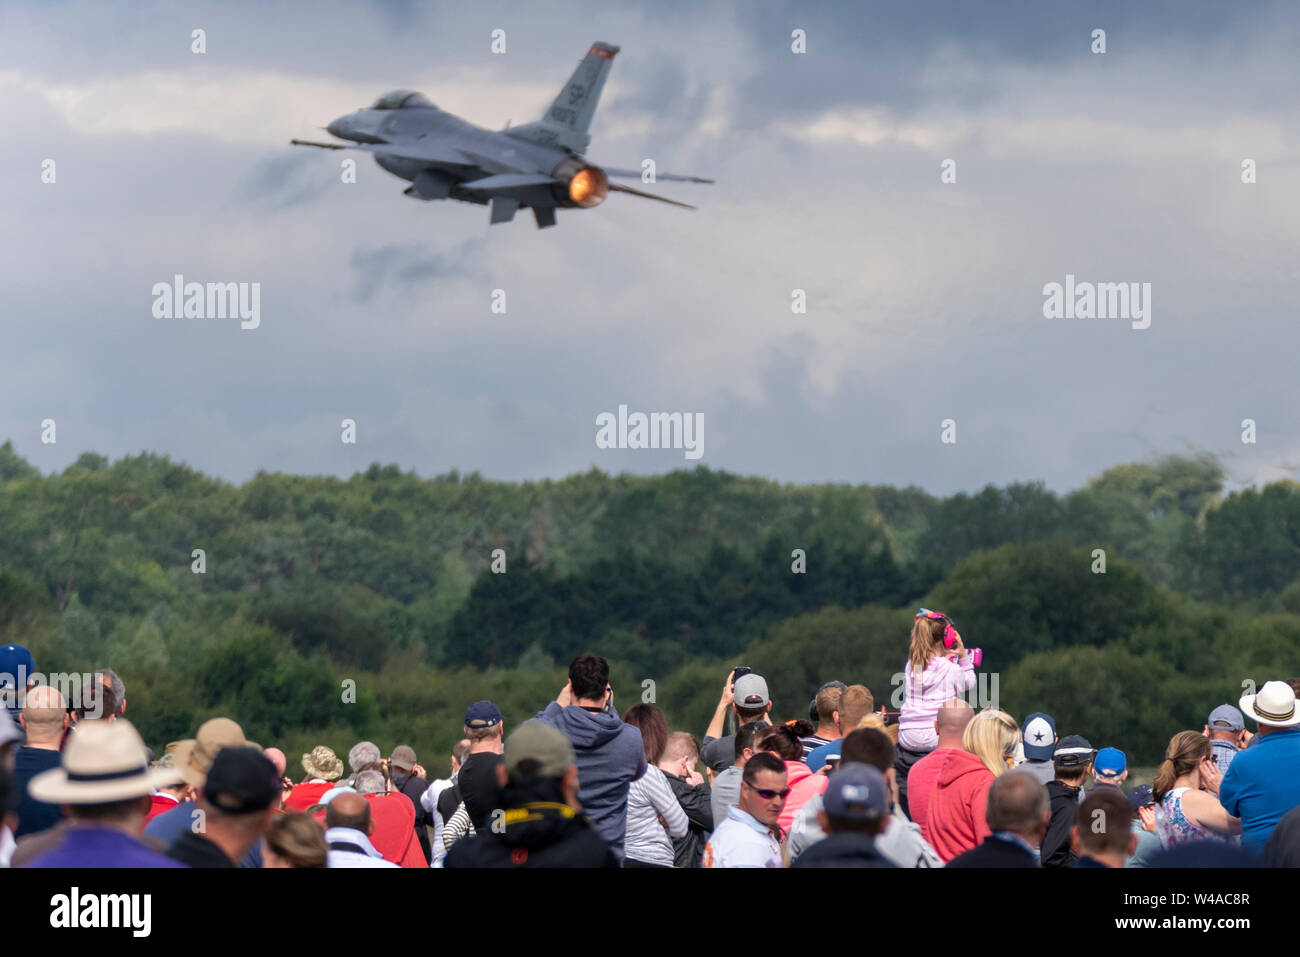 RAF Fairford, Gloucestershire, UK. RIAT is regarded as the world's largest military airshow with participating aircraft flying in from all over the globe, with over 30 air arms from 20 different countries present in 2019. USAF F-16 taking off in front of crowd Stock Photo